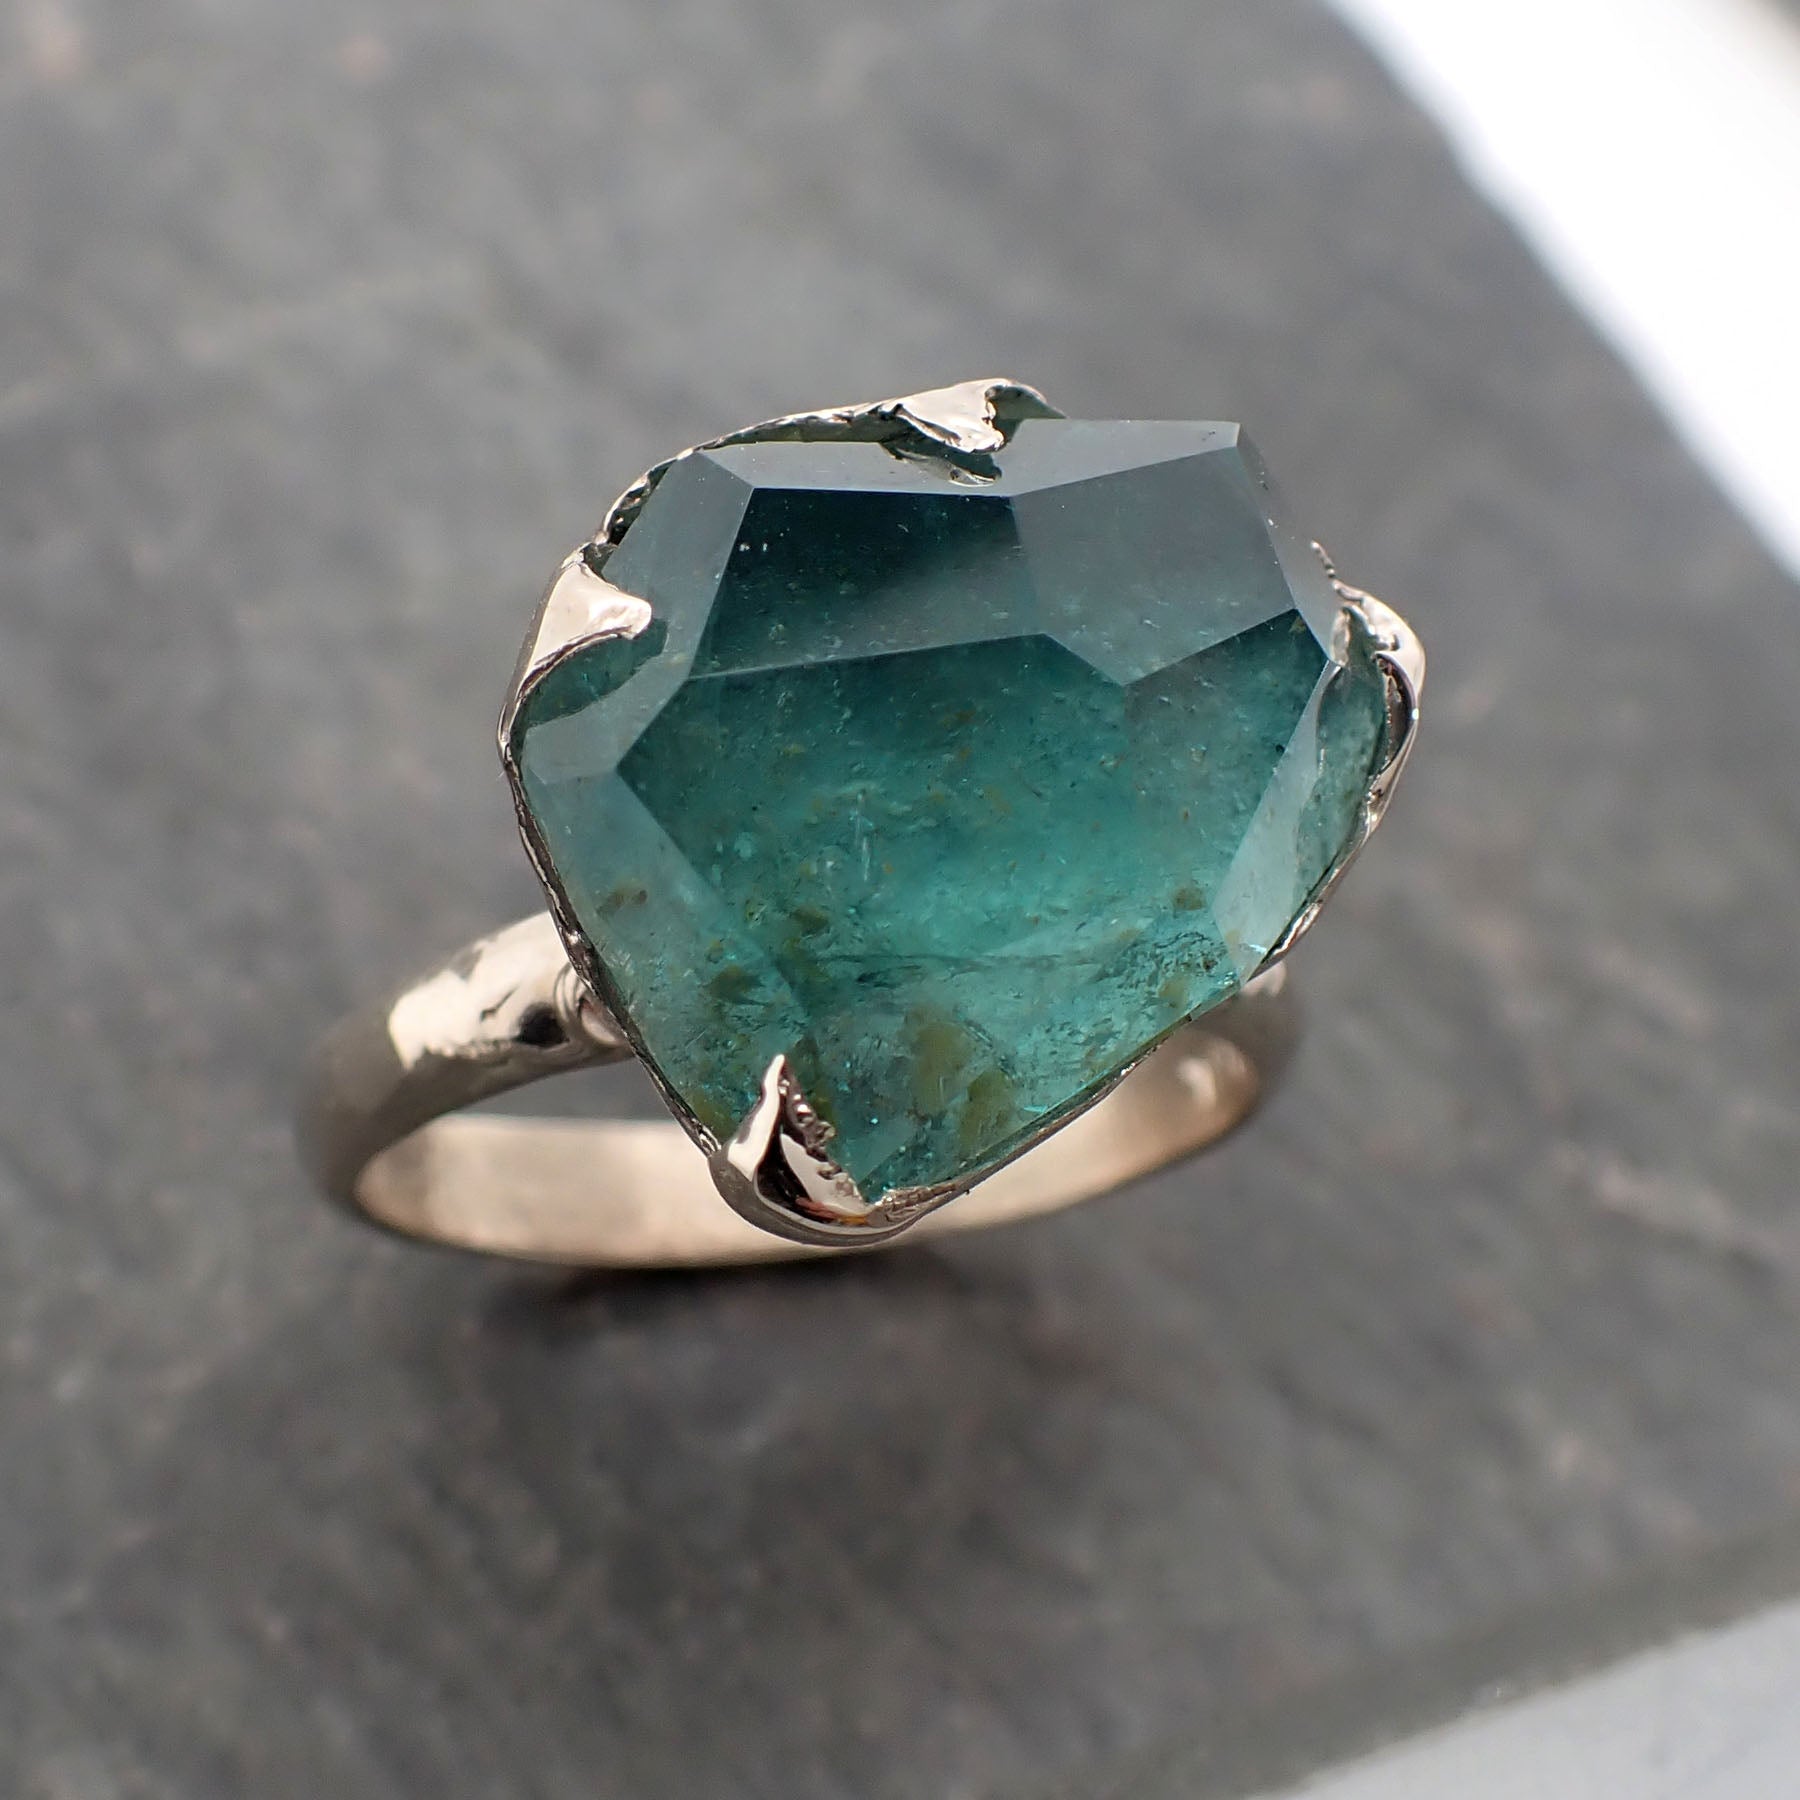 partially faceted sea green tourmaline white gold ring gemstone tourmaline recycled 18k stacking statement byangeline 2372 Alternative Engagement